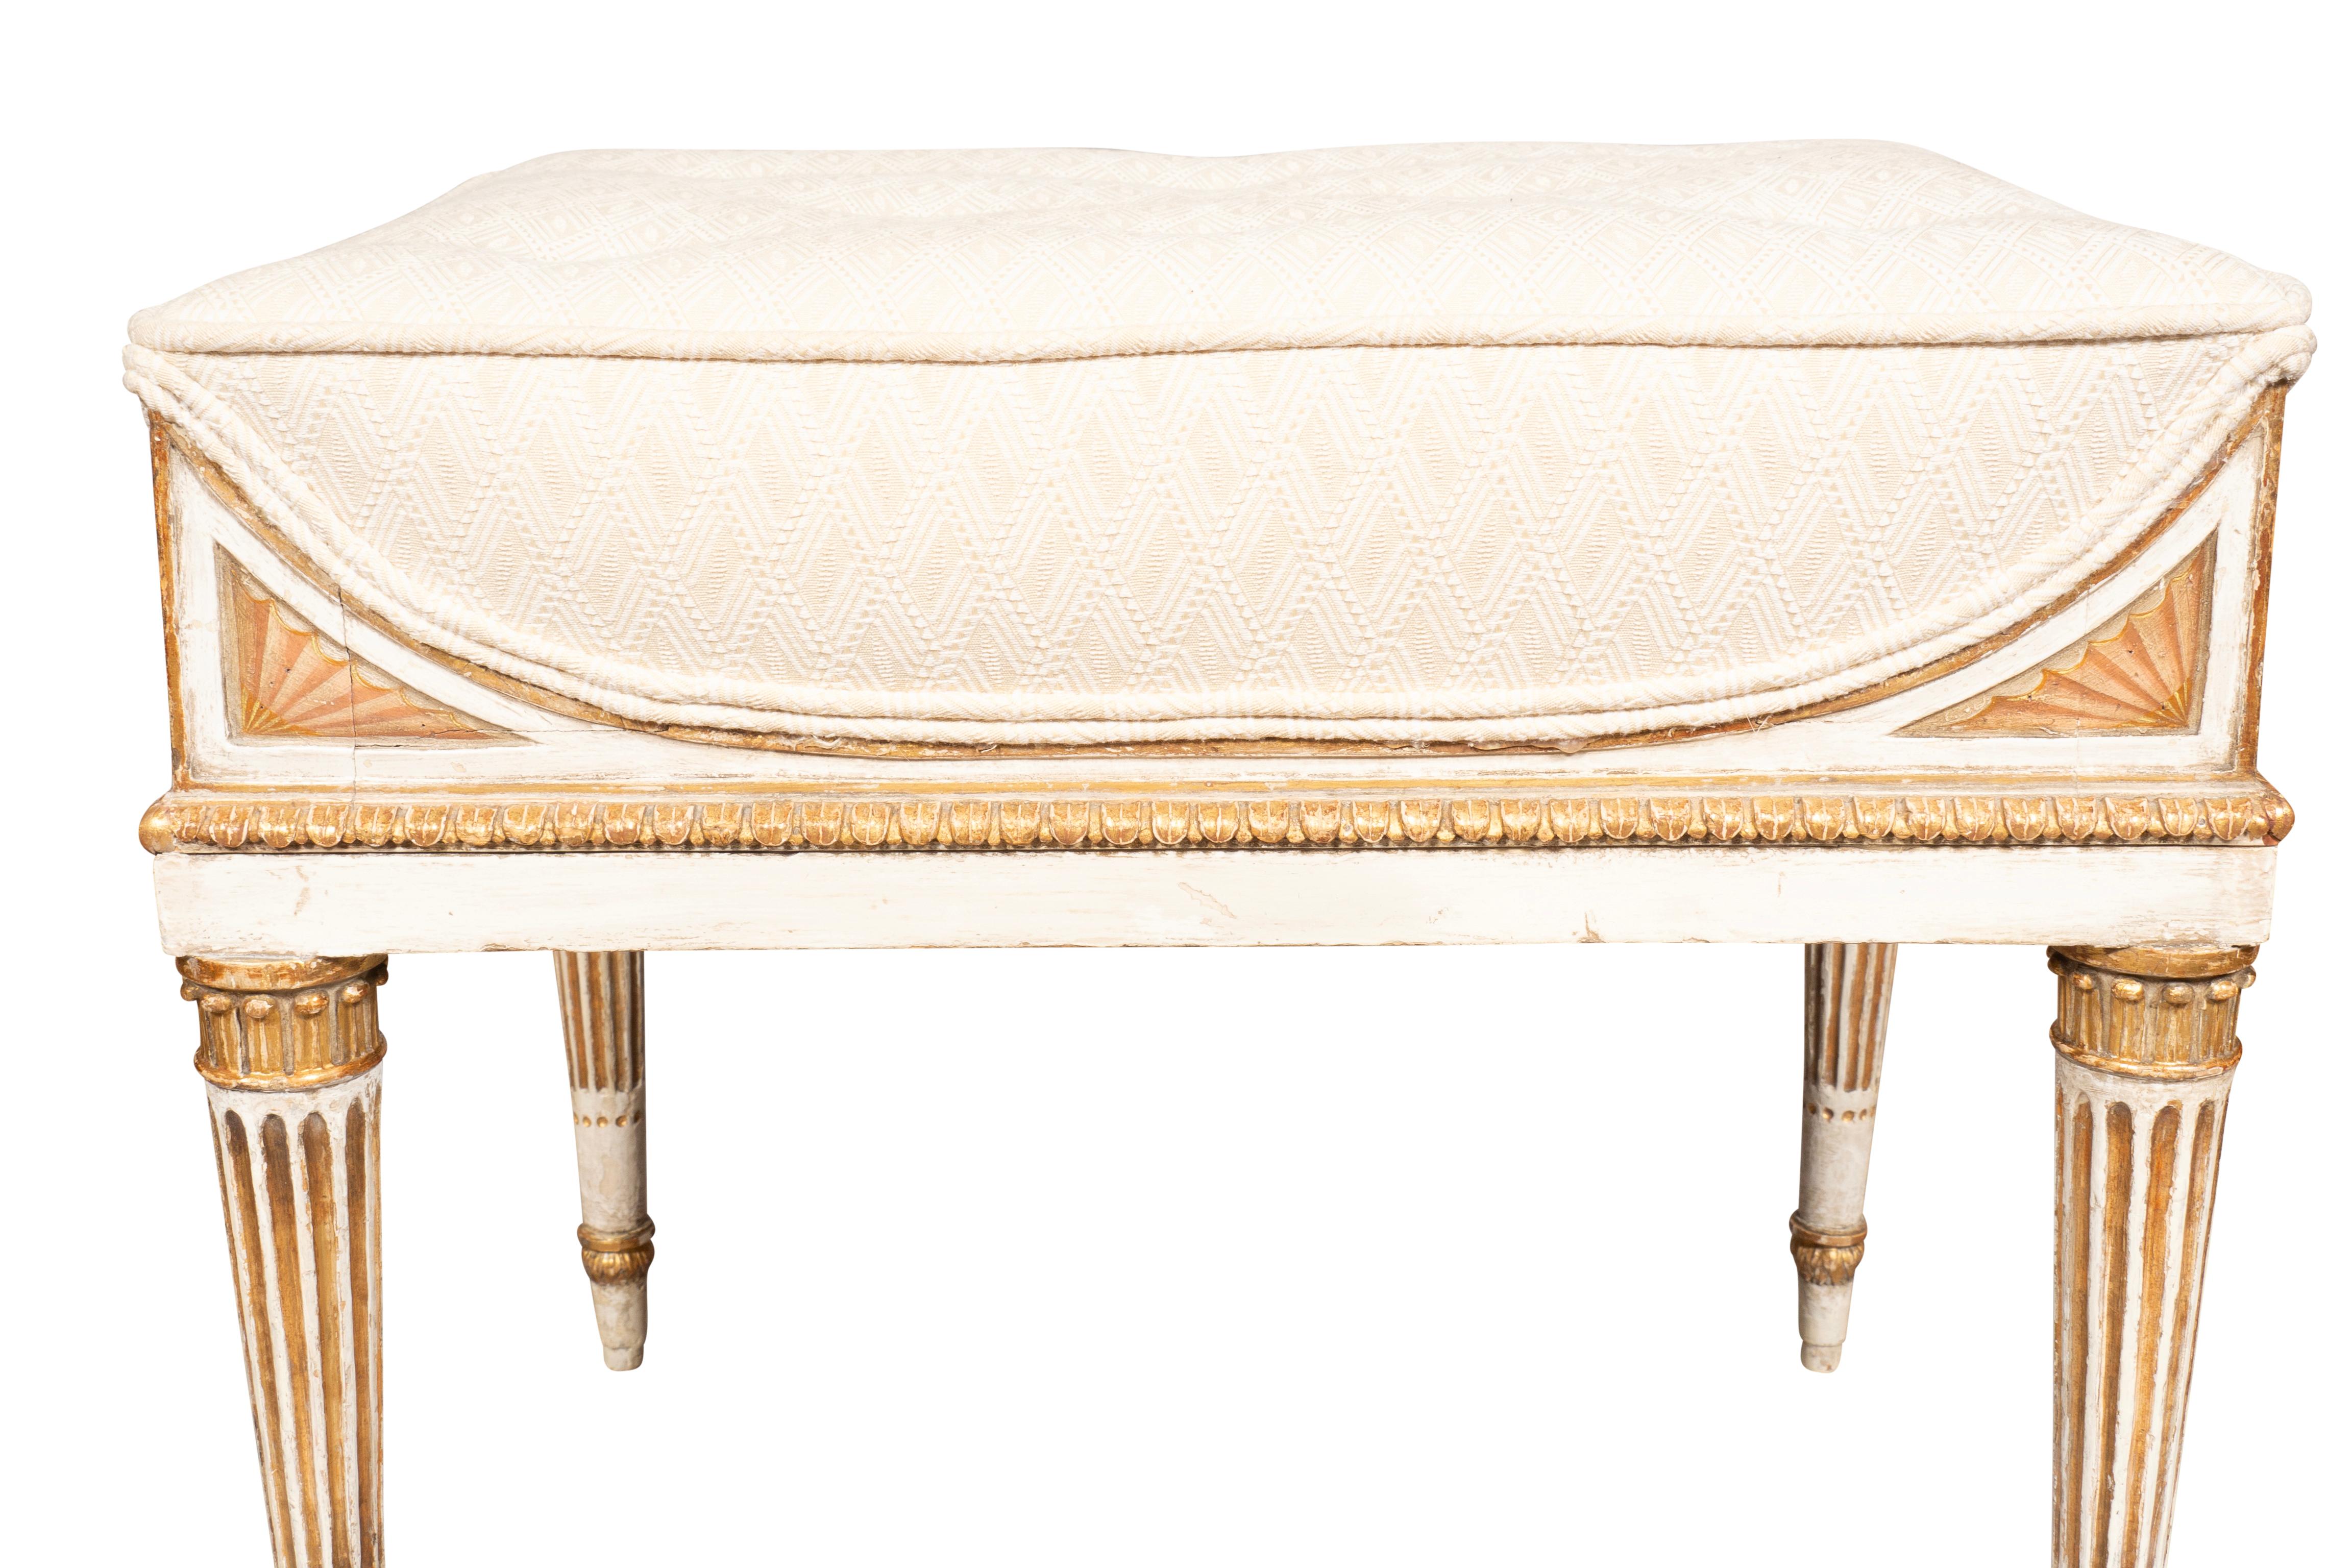  German Neoclassical Creme Painted And Giltwood Bench From Schloss Seelowitz For Sale 2